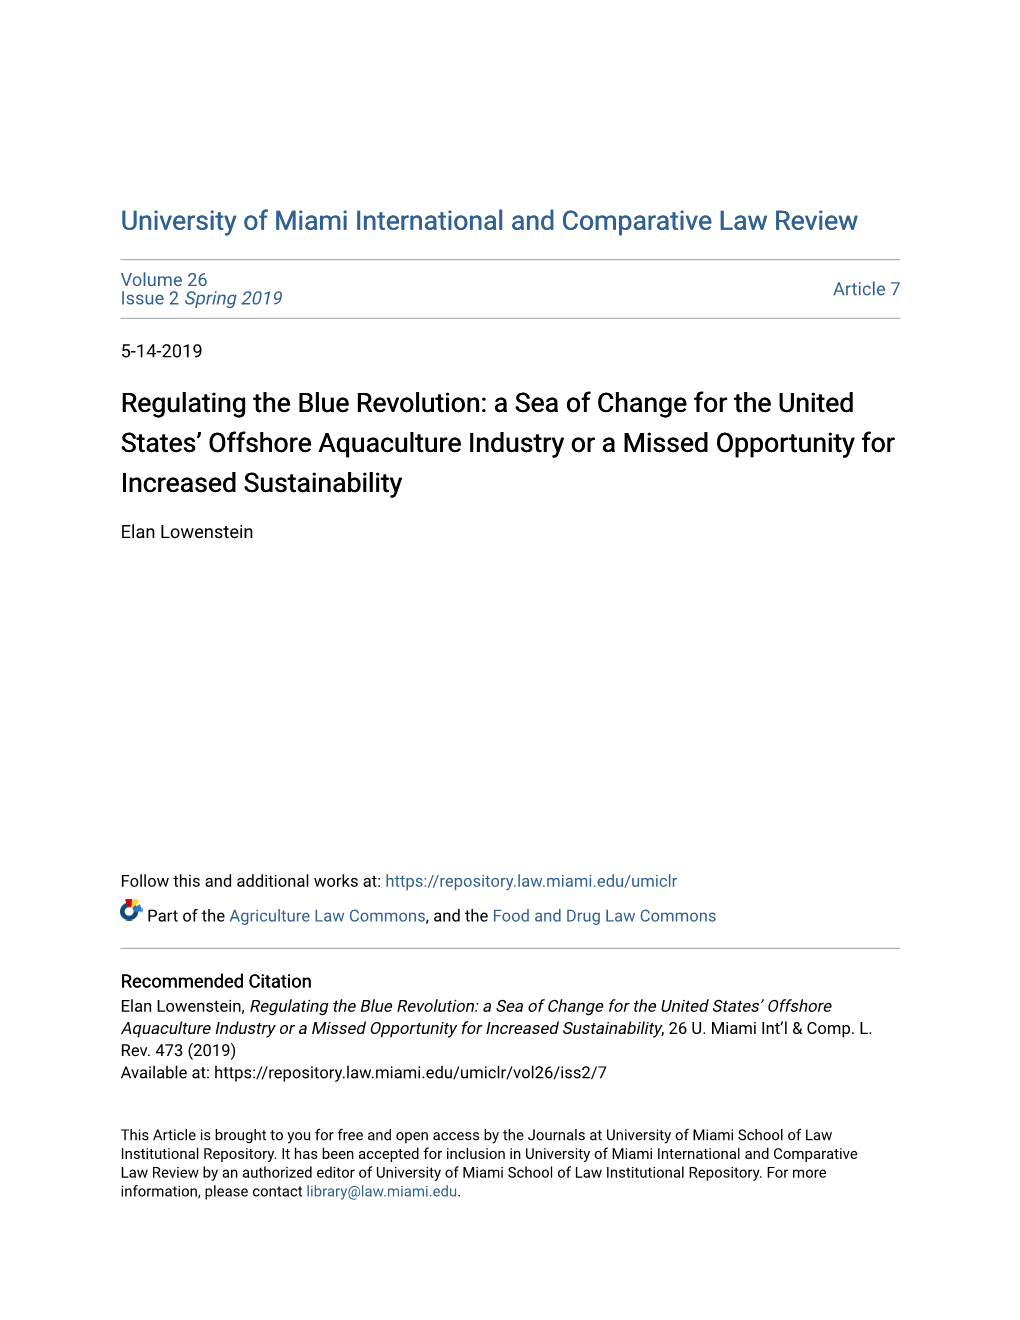 Regulating the Blue Revolution: a Sea of Change for the United States’ Offshore Aquaculture Industry Or a Missed Opportunity for Increased Sustainability